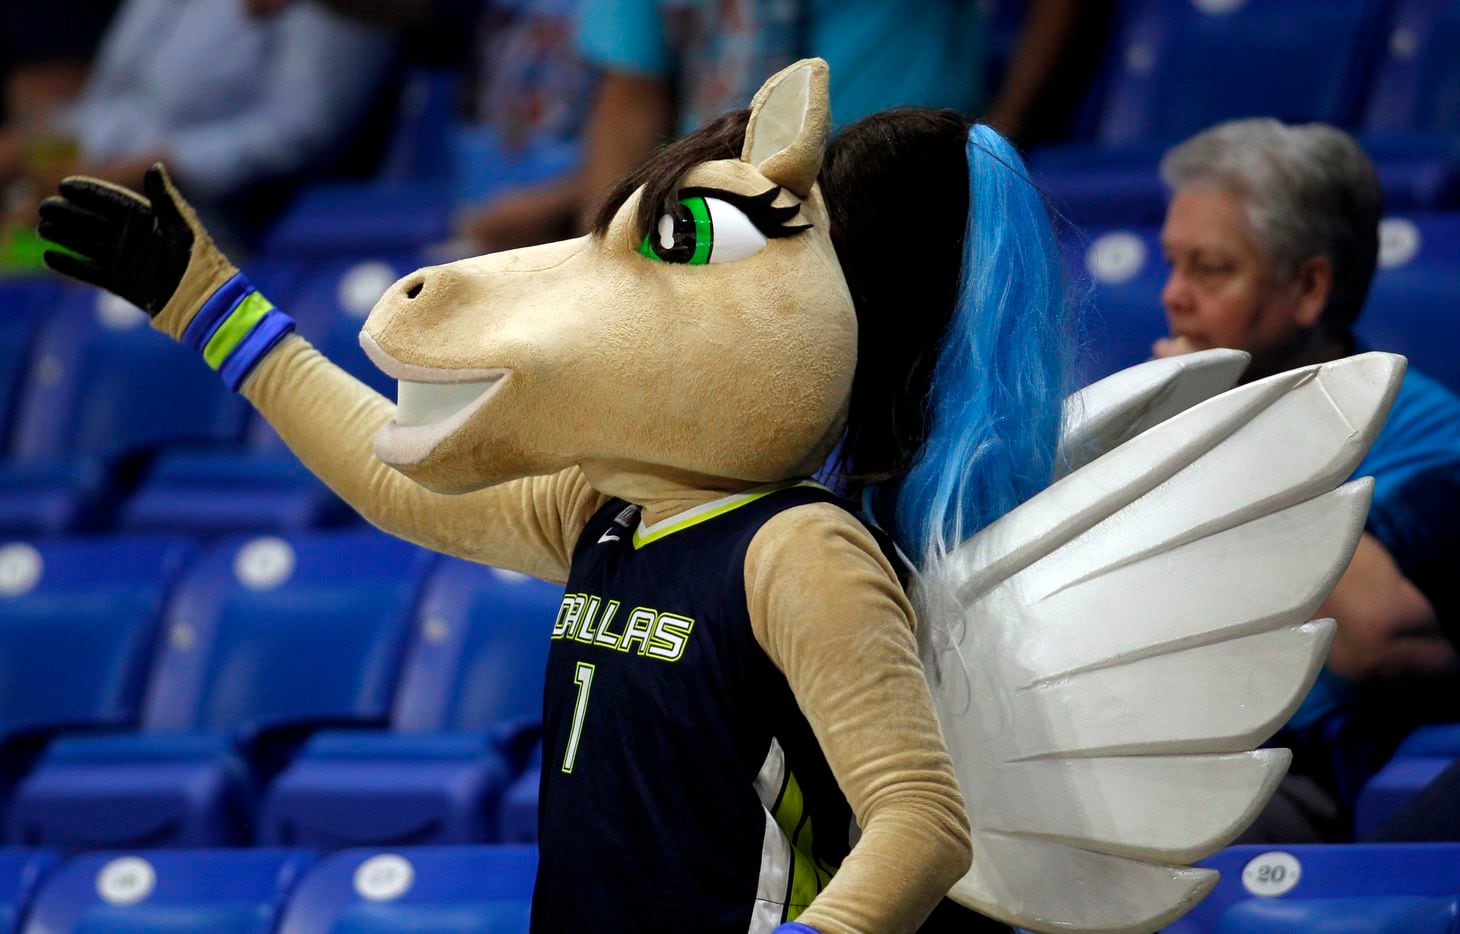 Dallas Wings mascot "Lightning" works to energize fans just prior to the opening tip between the Wings and the Las Vegas Aces. The two WNBA teams played their game at College Park Center on the campus of UT-Arlington on July 11, 2021. (Steve Hamm/ Special Contributor)